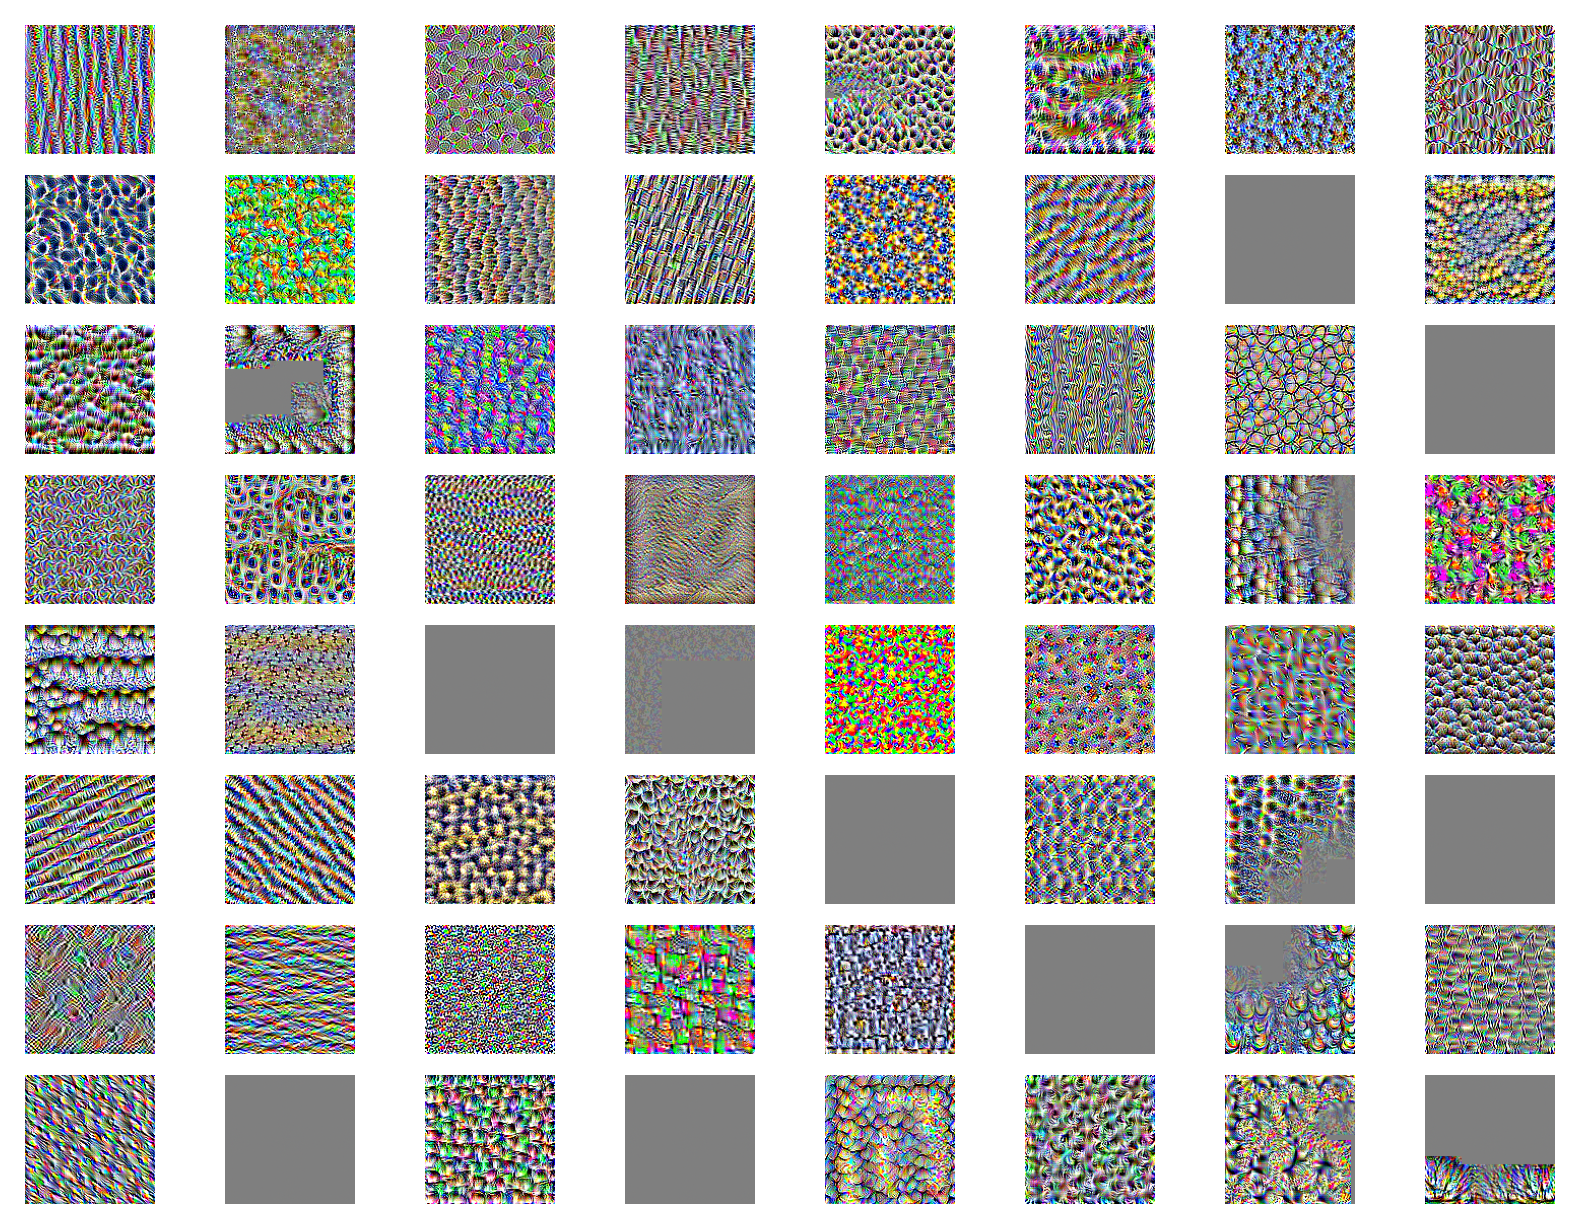 A lot of bright colourful images of varying patterns